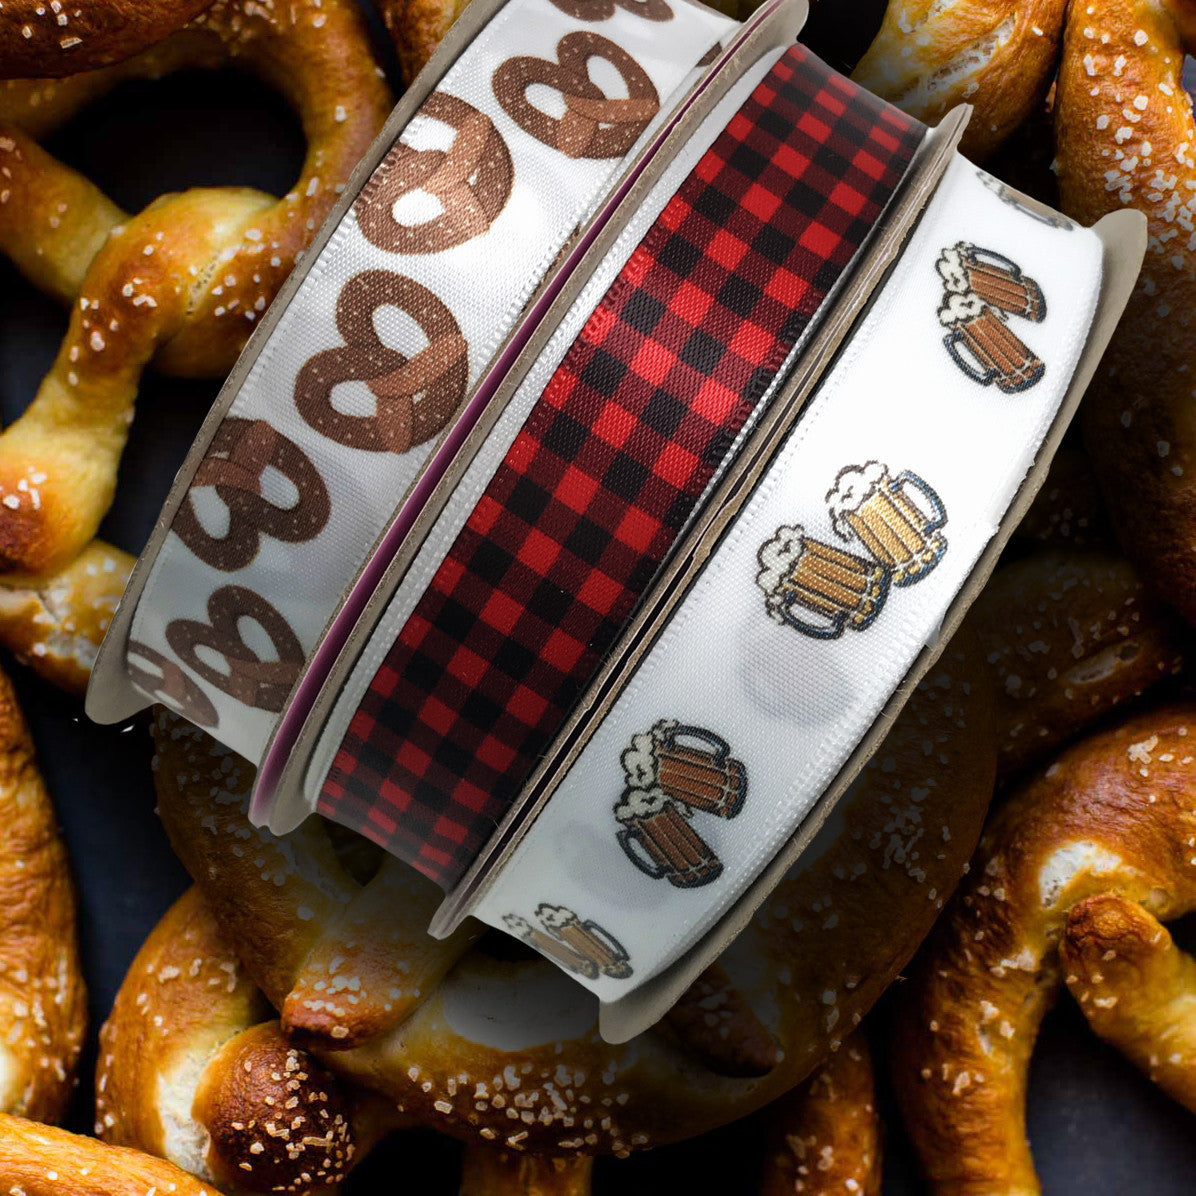 There's nothing like beer and pretzels! Pair these with our buffalo plaid for a fun bachelor or sports themed party! All our ribbon is designed and printed in the USA